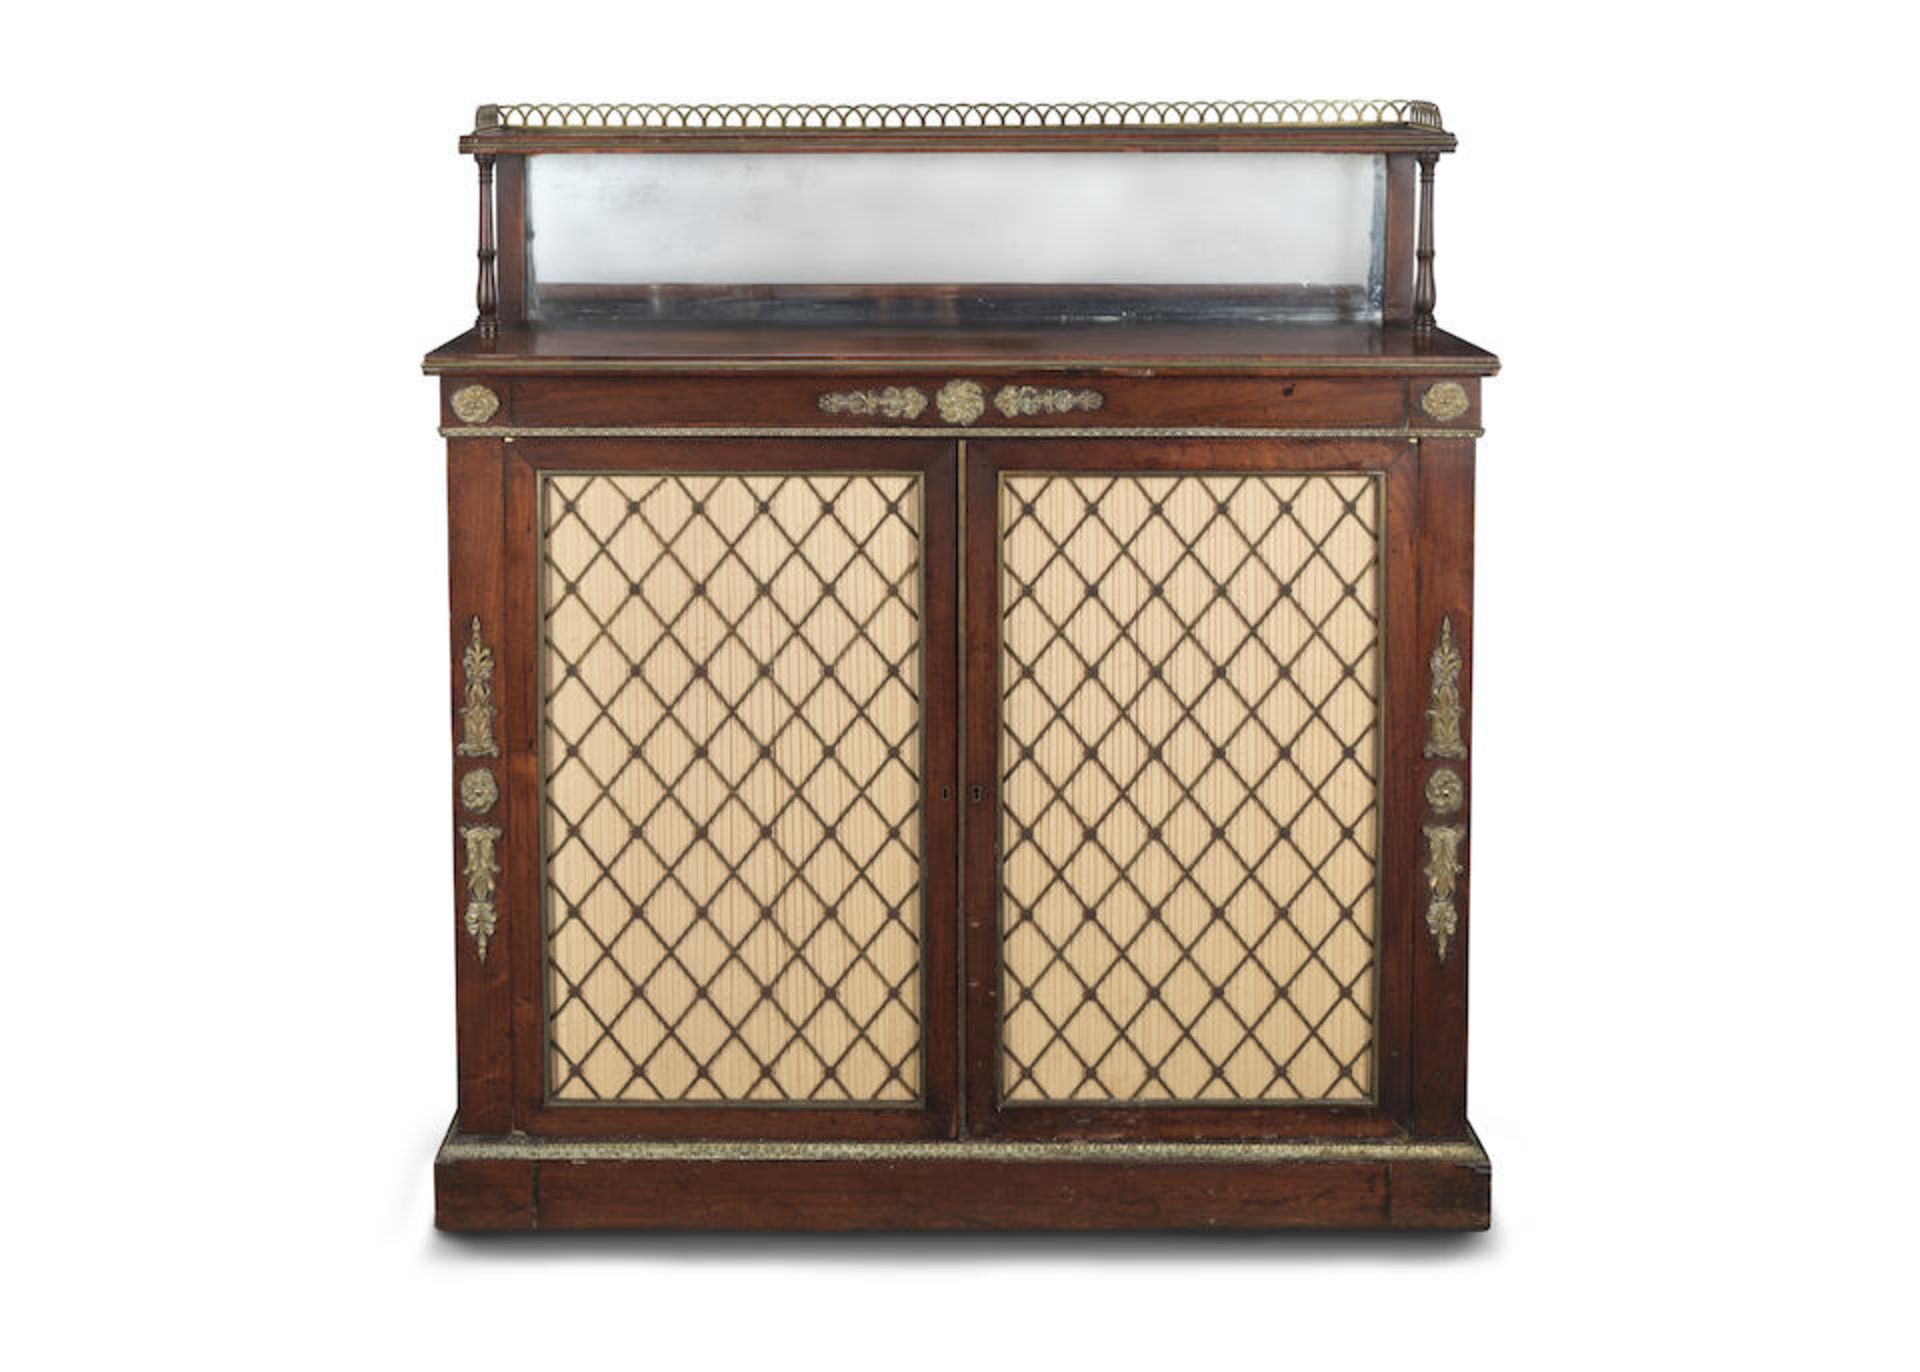 A Regency ormolu and brass mounted rosewood side cabinet or chiffonier in the French taste